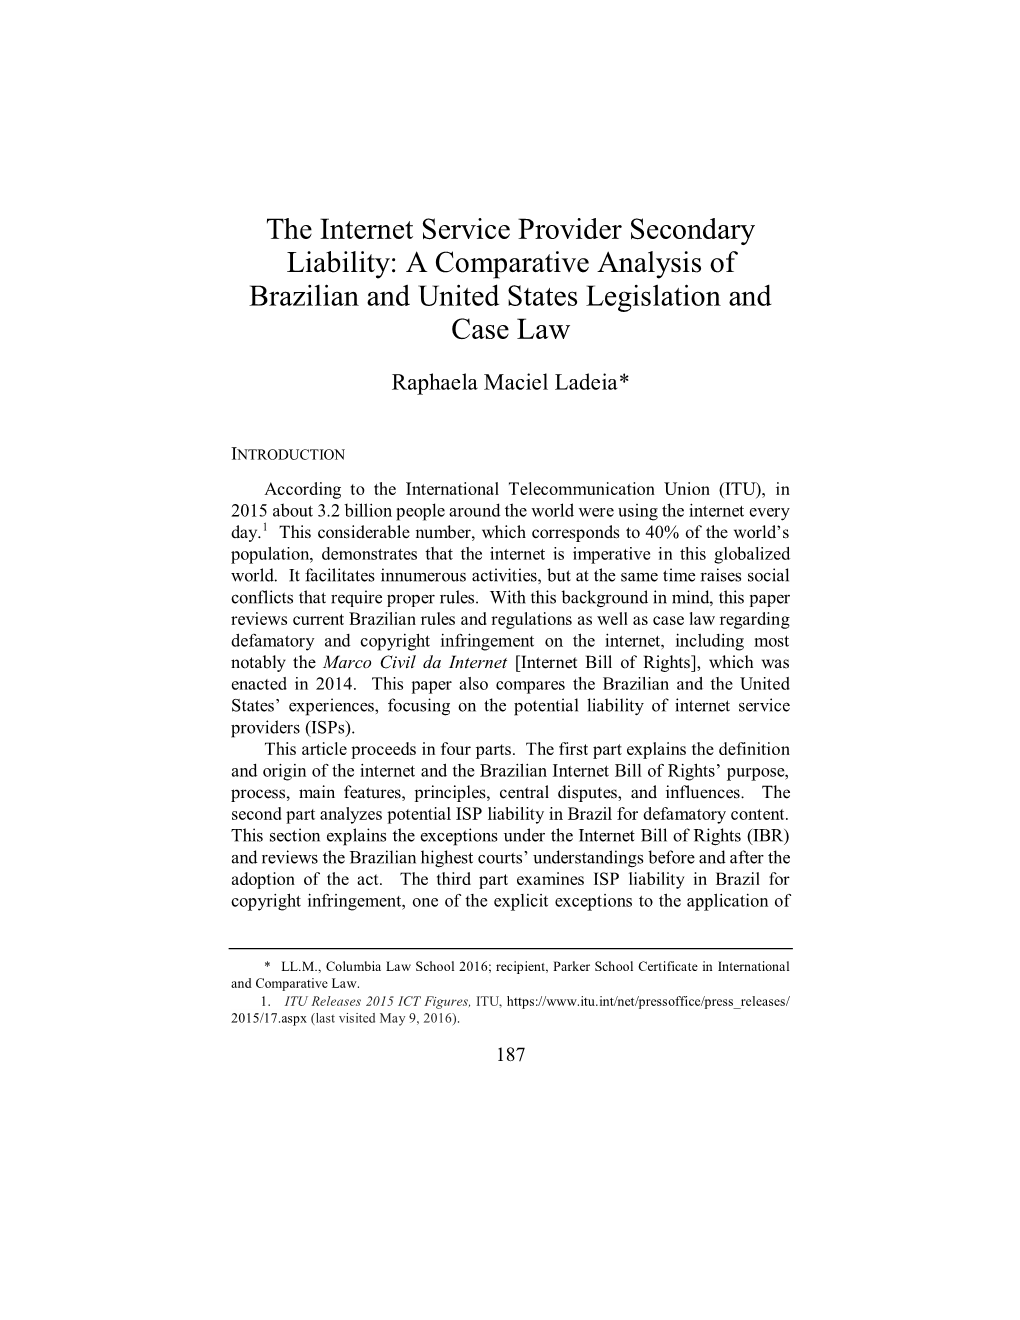 The Internet Service Provider Secondary Liability: a Comparative Analysis of Brazilian and United States Legislation and Case Law